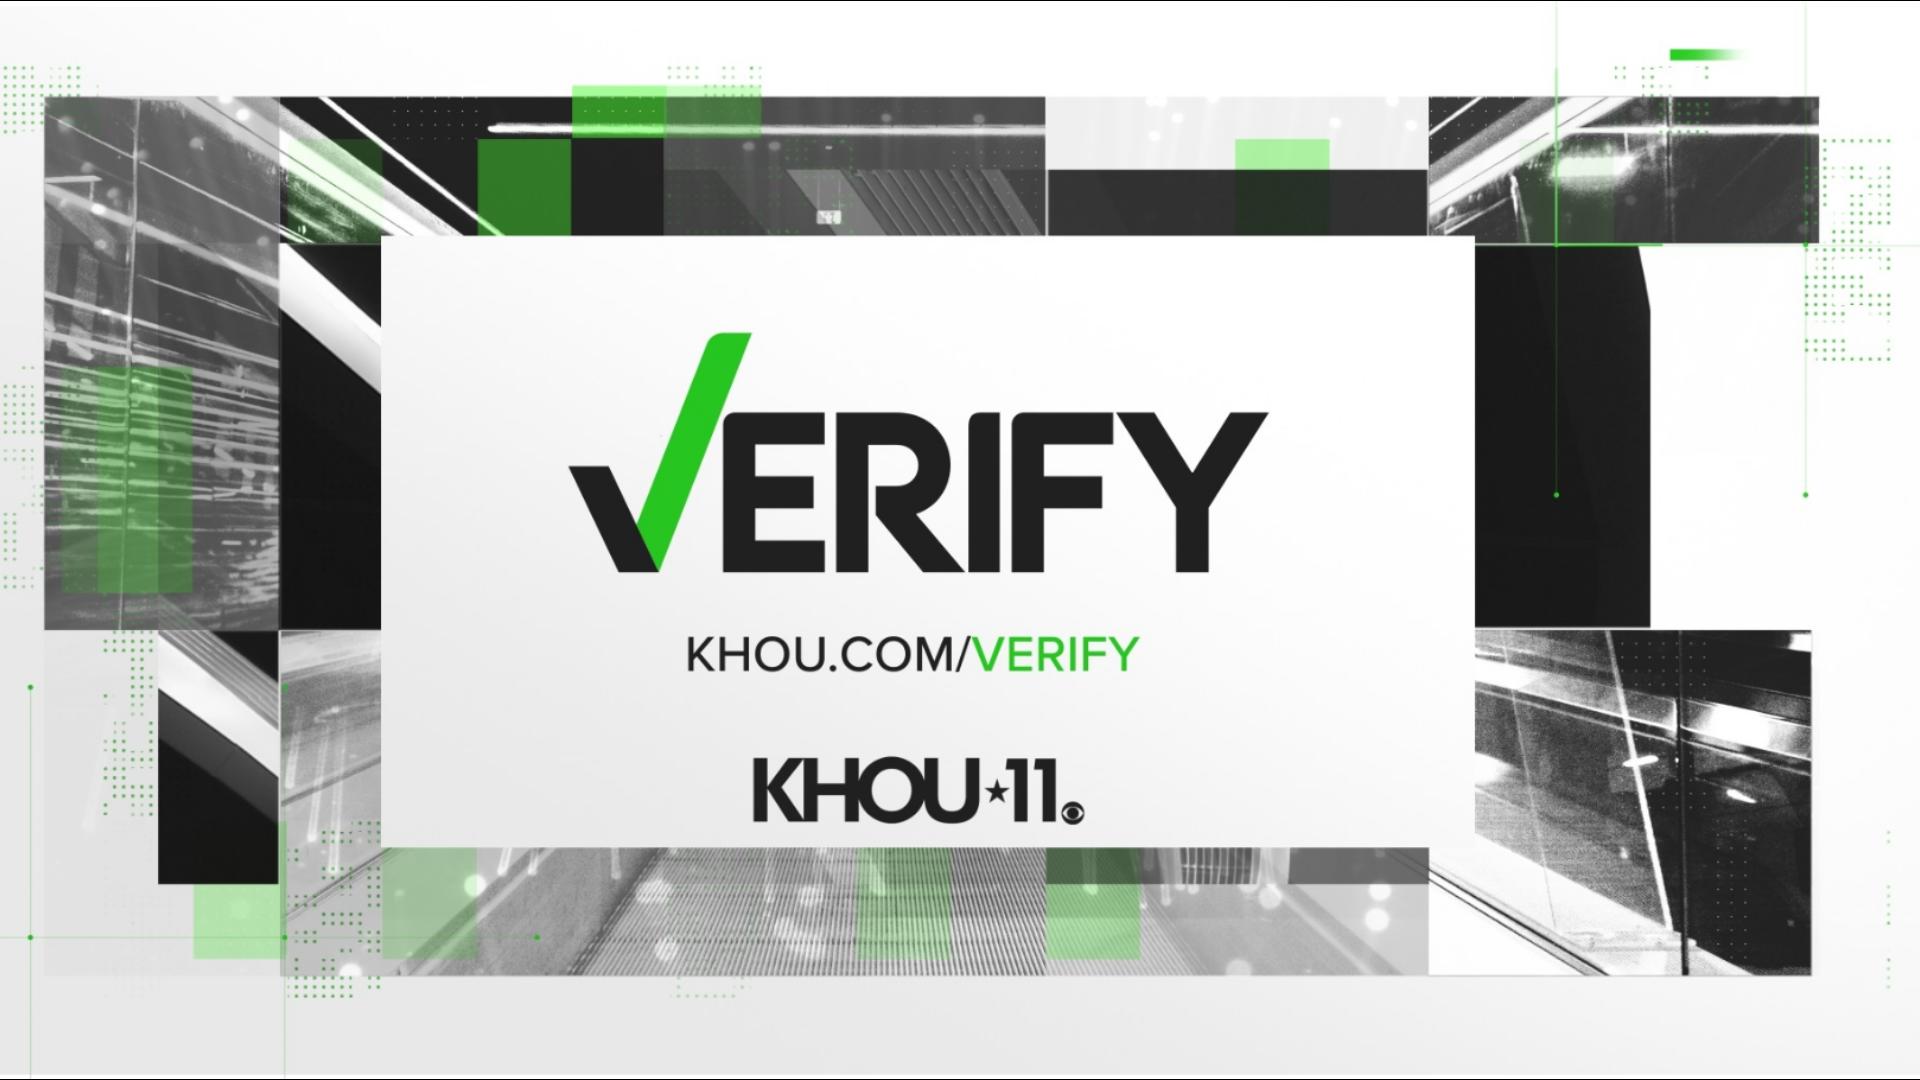 It can be hard to spot what's true of false, that's why KHOU 11 VERIFY is here to help.